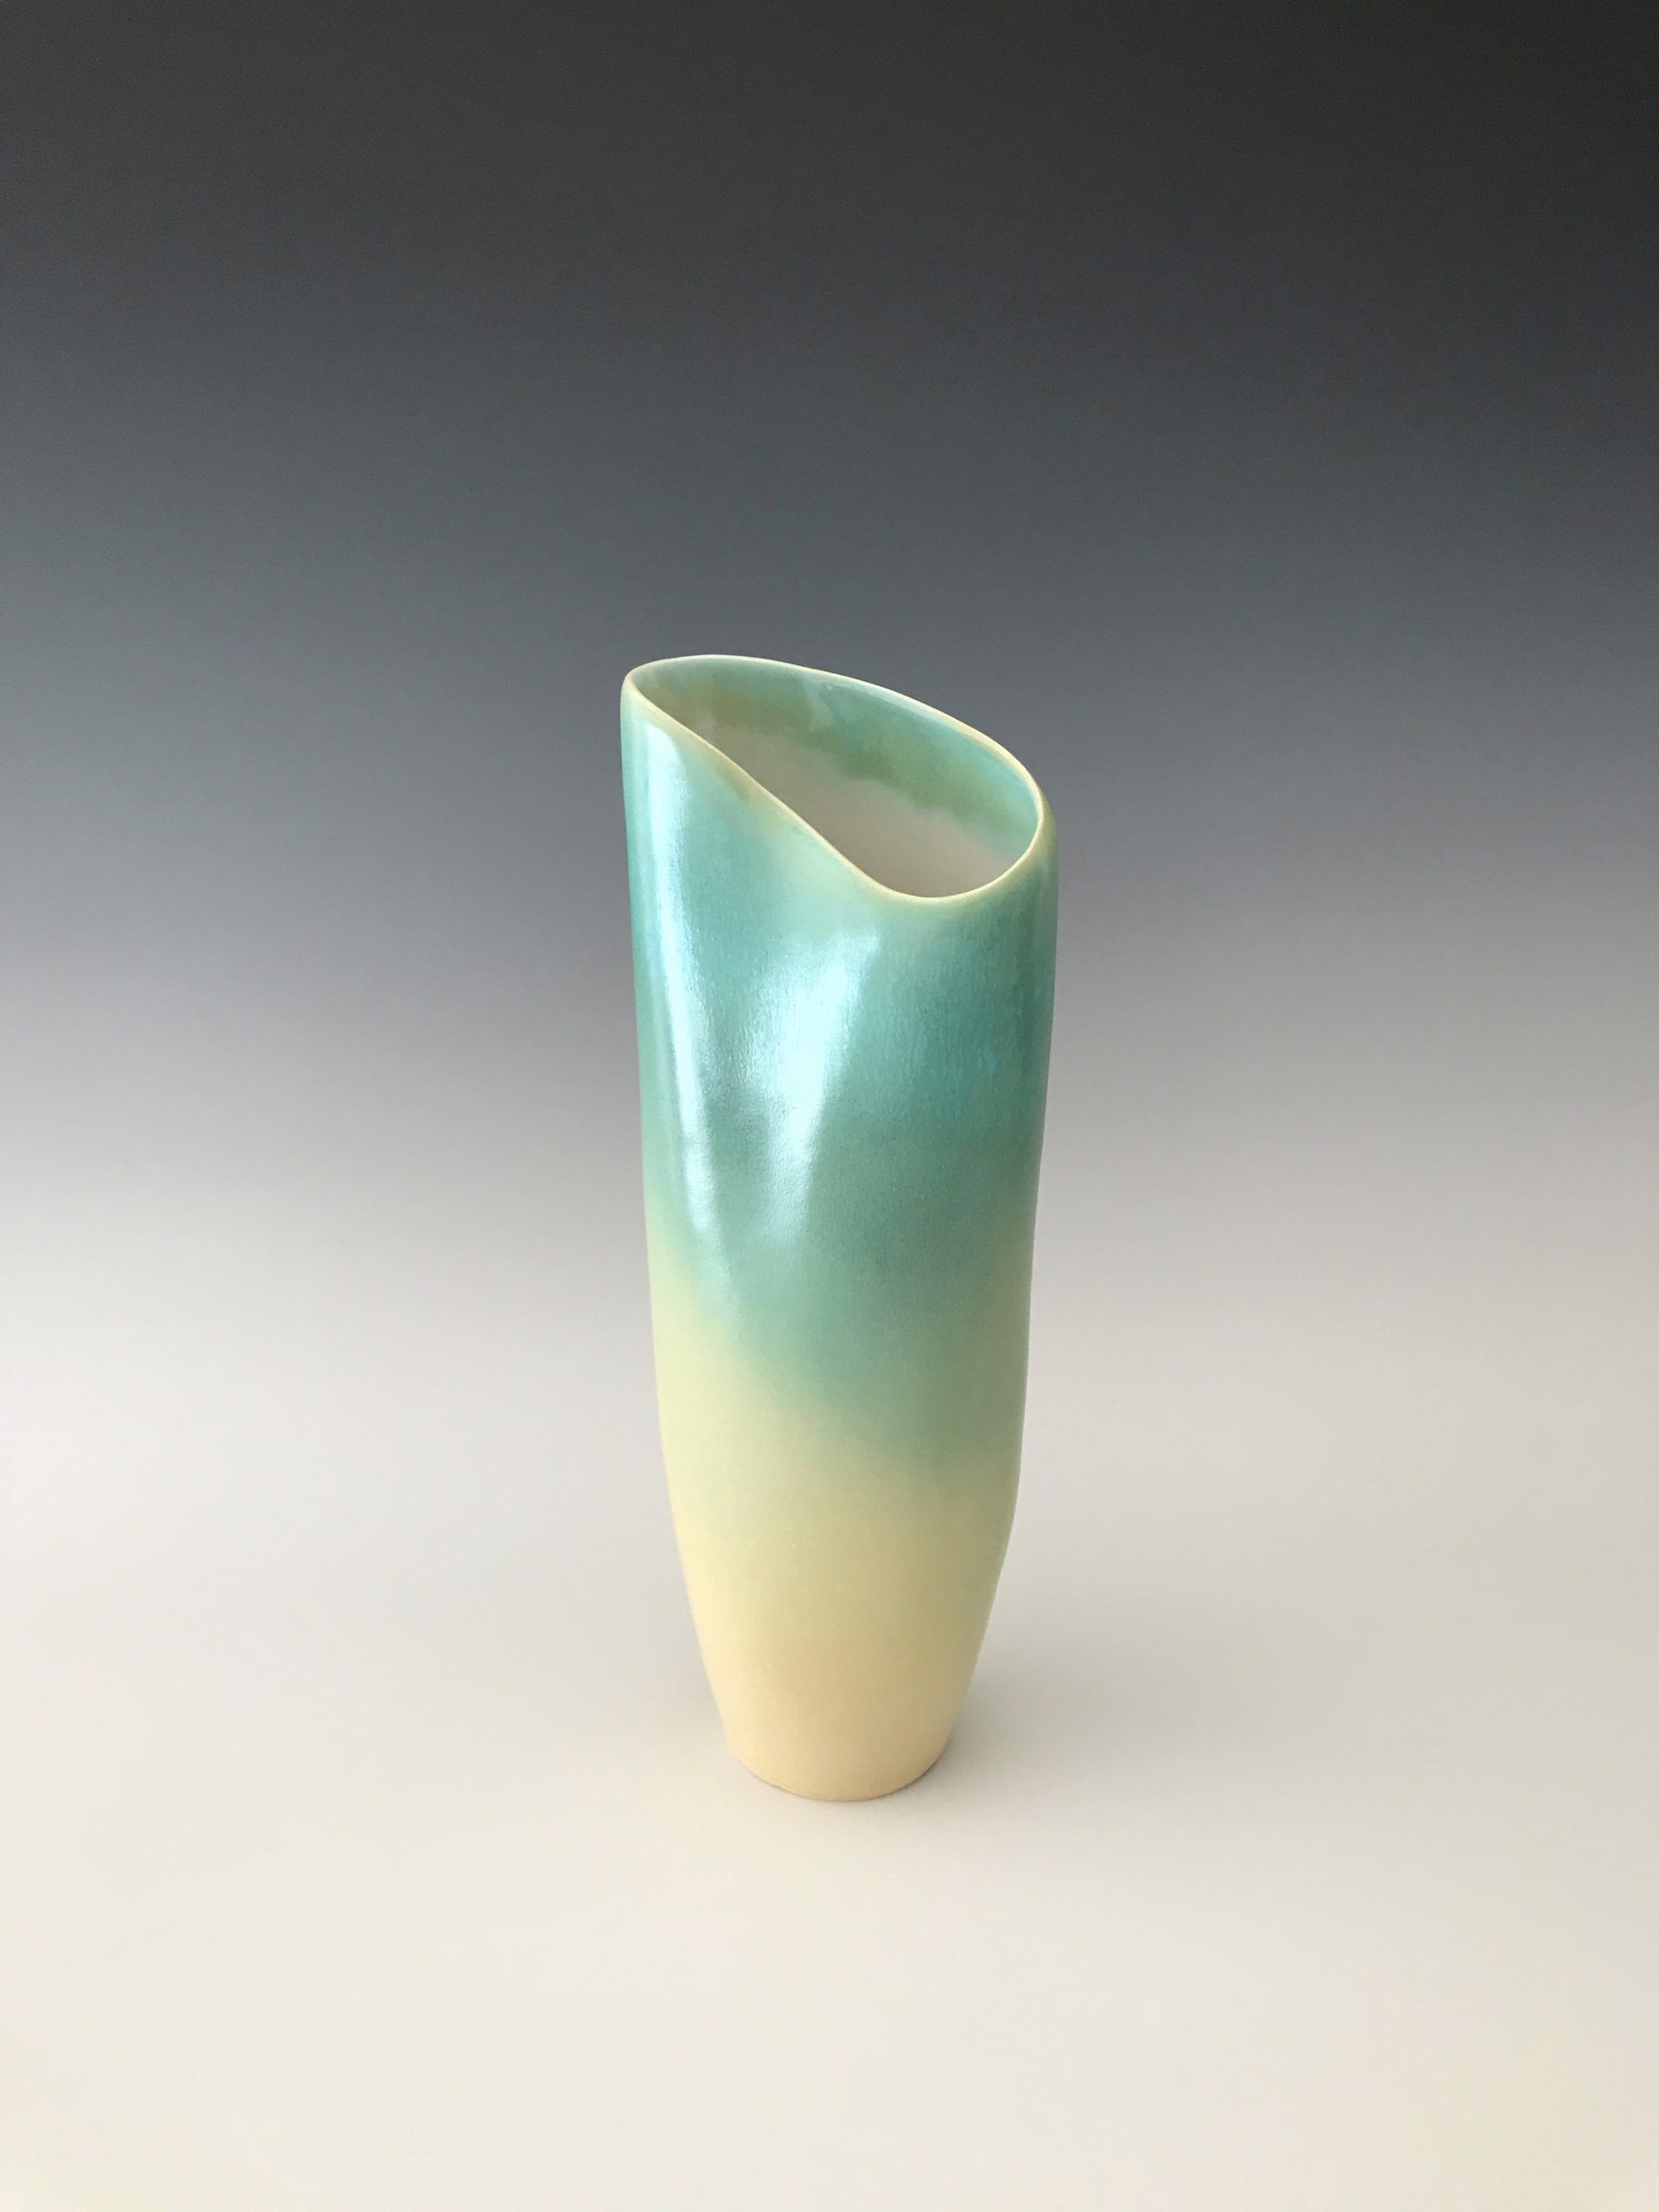 Tranquility Tall Vessel #2001 by YiFenn Strickland